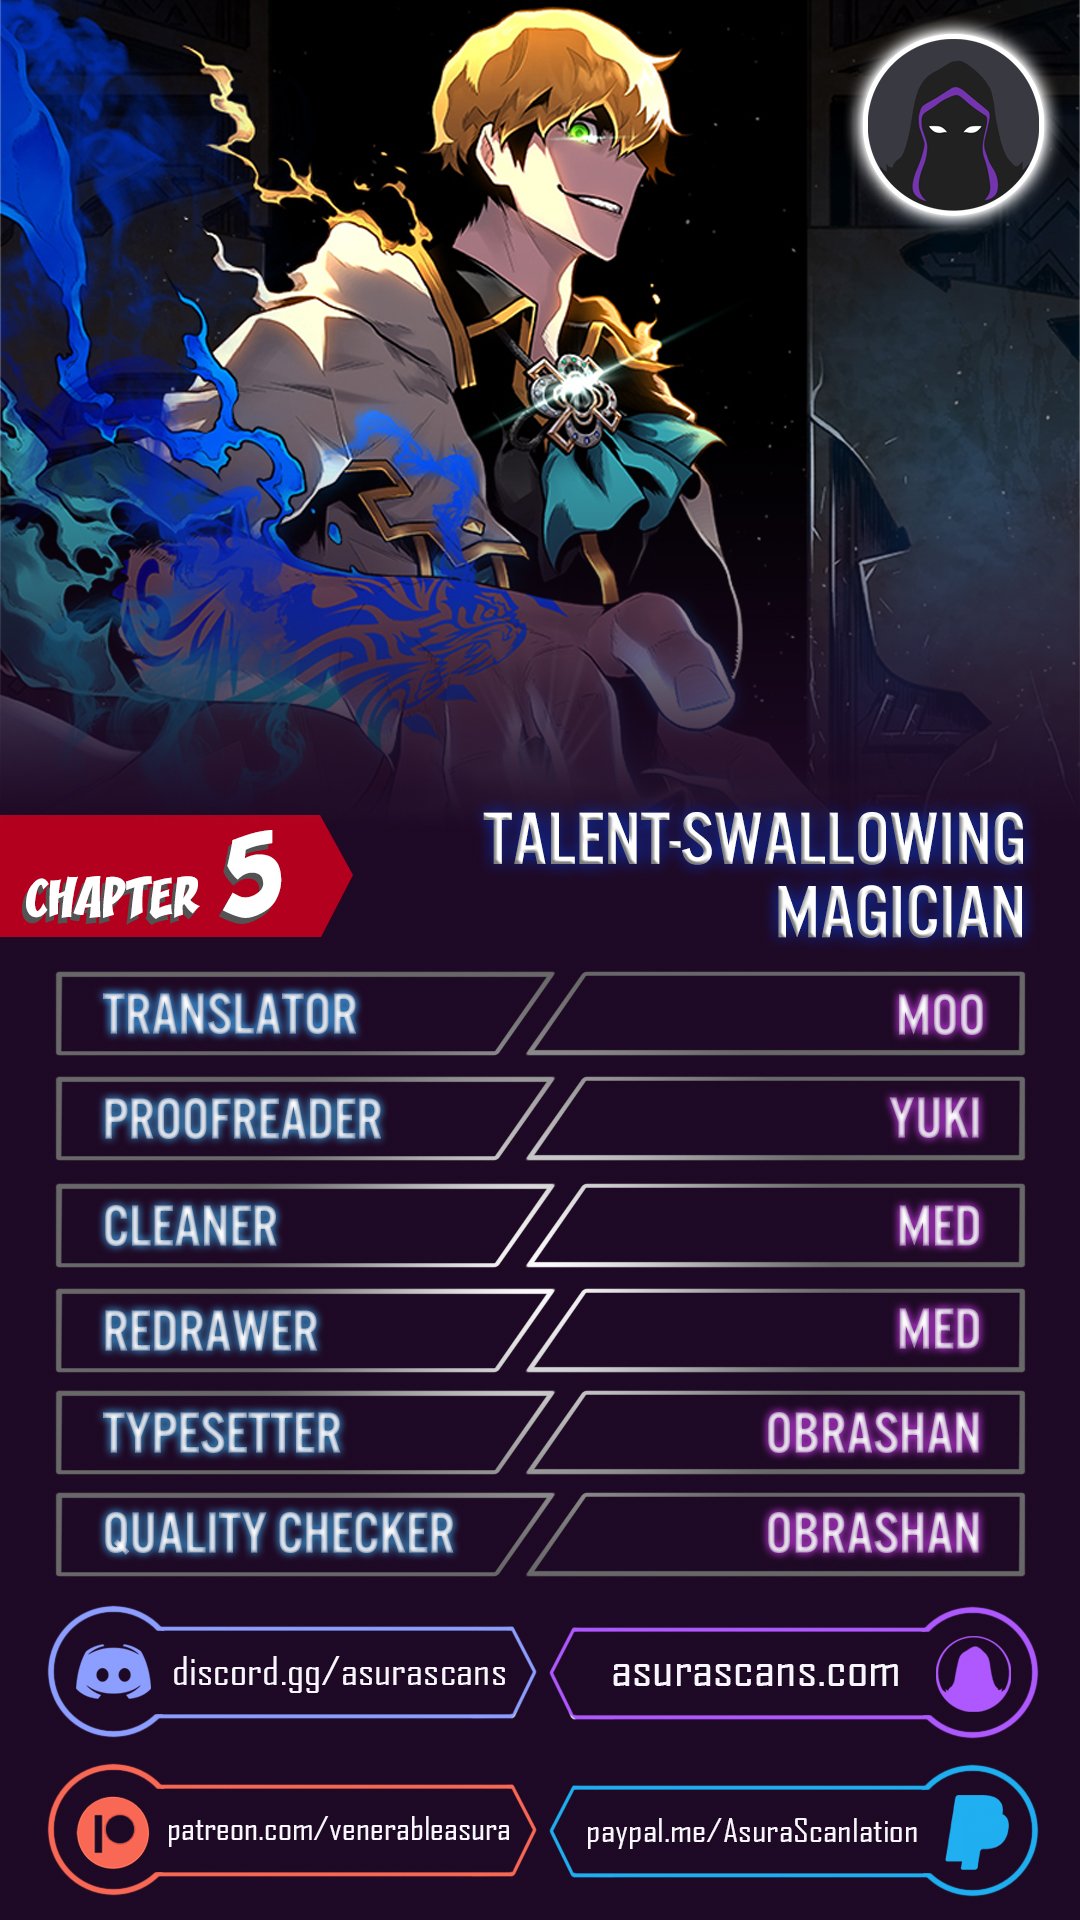 Talent-Swallowing Magician - Chapter 15403 - Image 1